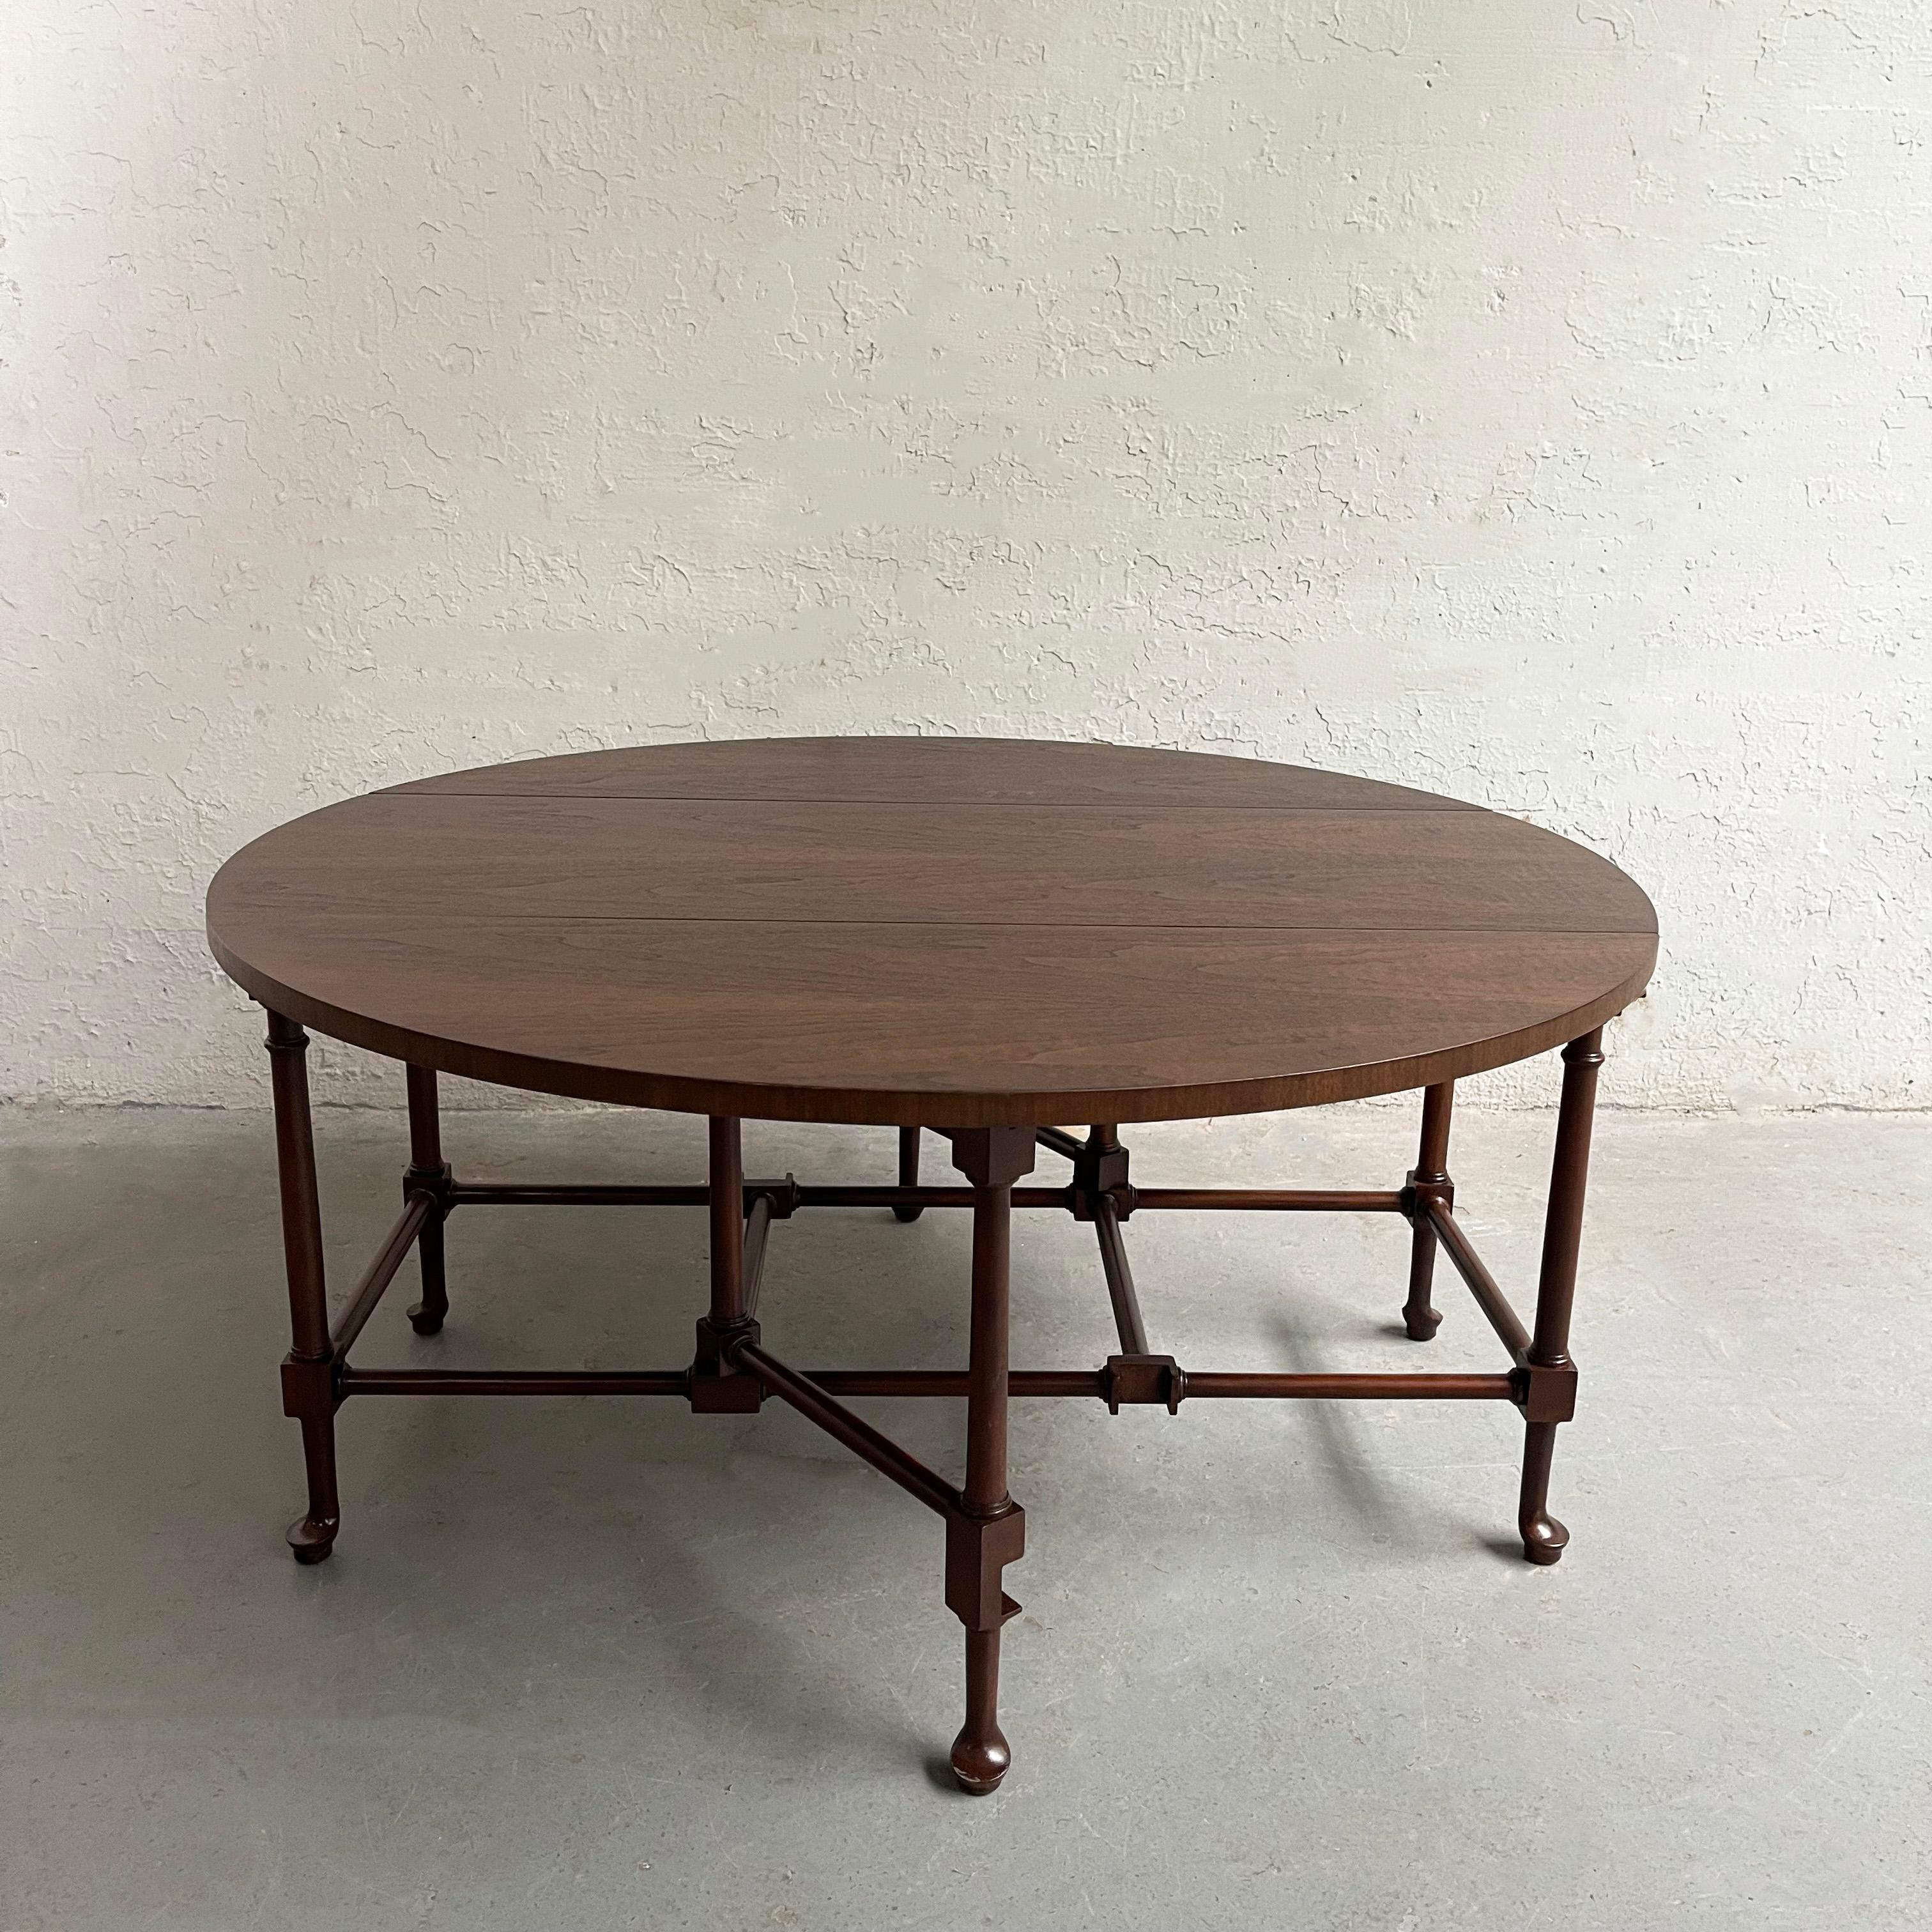 Midcentury, Queen Anne style, walnut, gate-fold, drop leaf, coffee table by Baker Furniture is 38 inches diameter when fully opened. It can be used as a demi-lune table at 27 inches or folded to 16 inches with both leaves down.